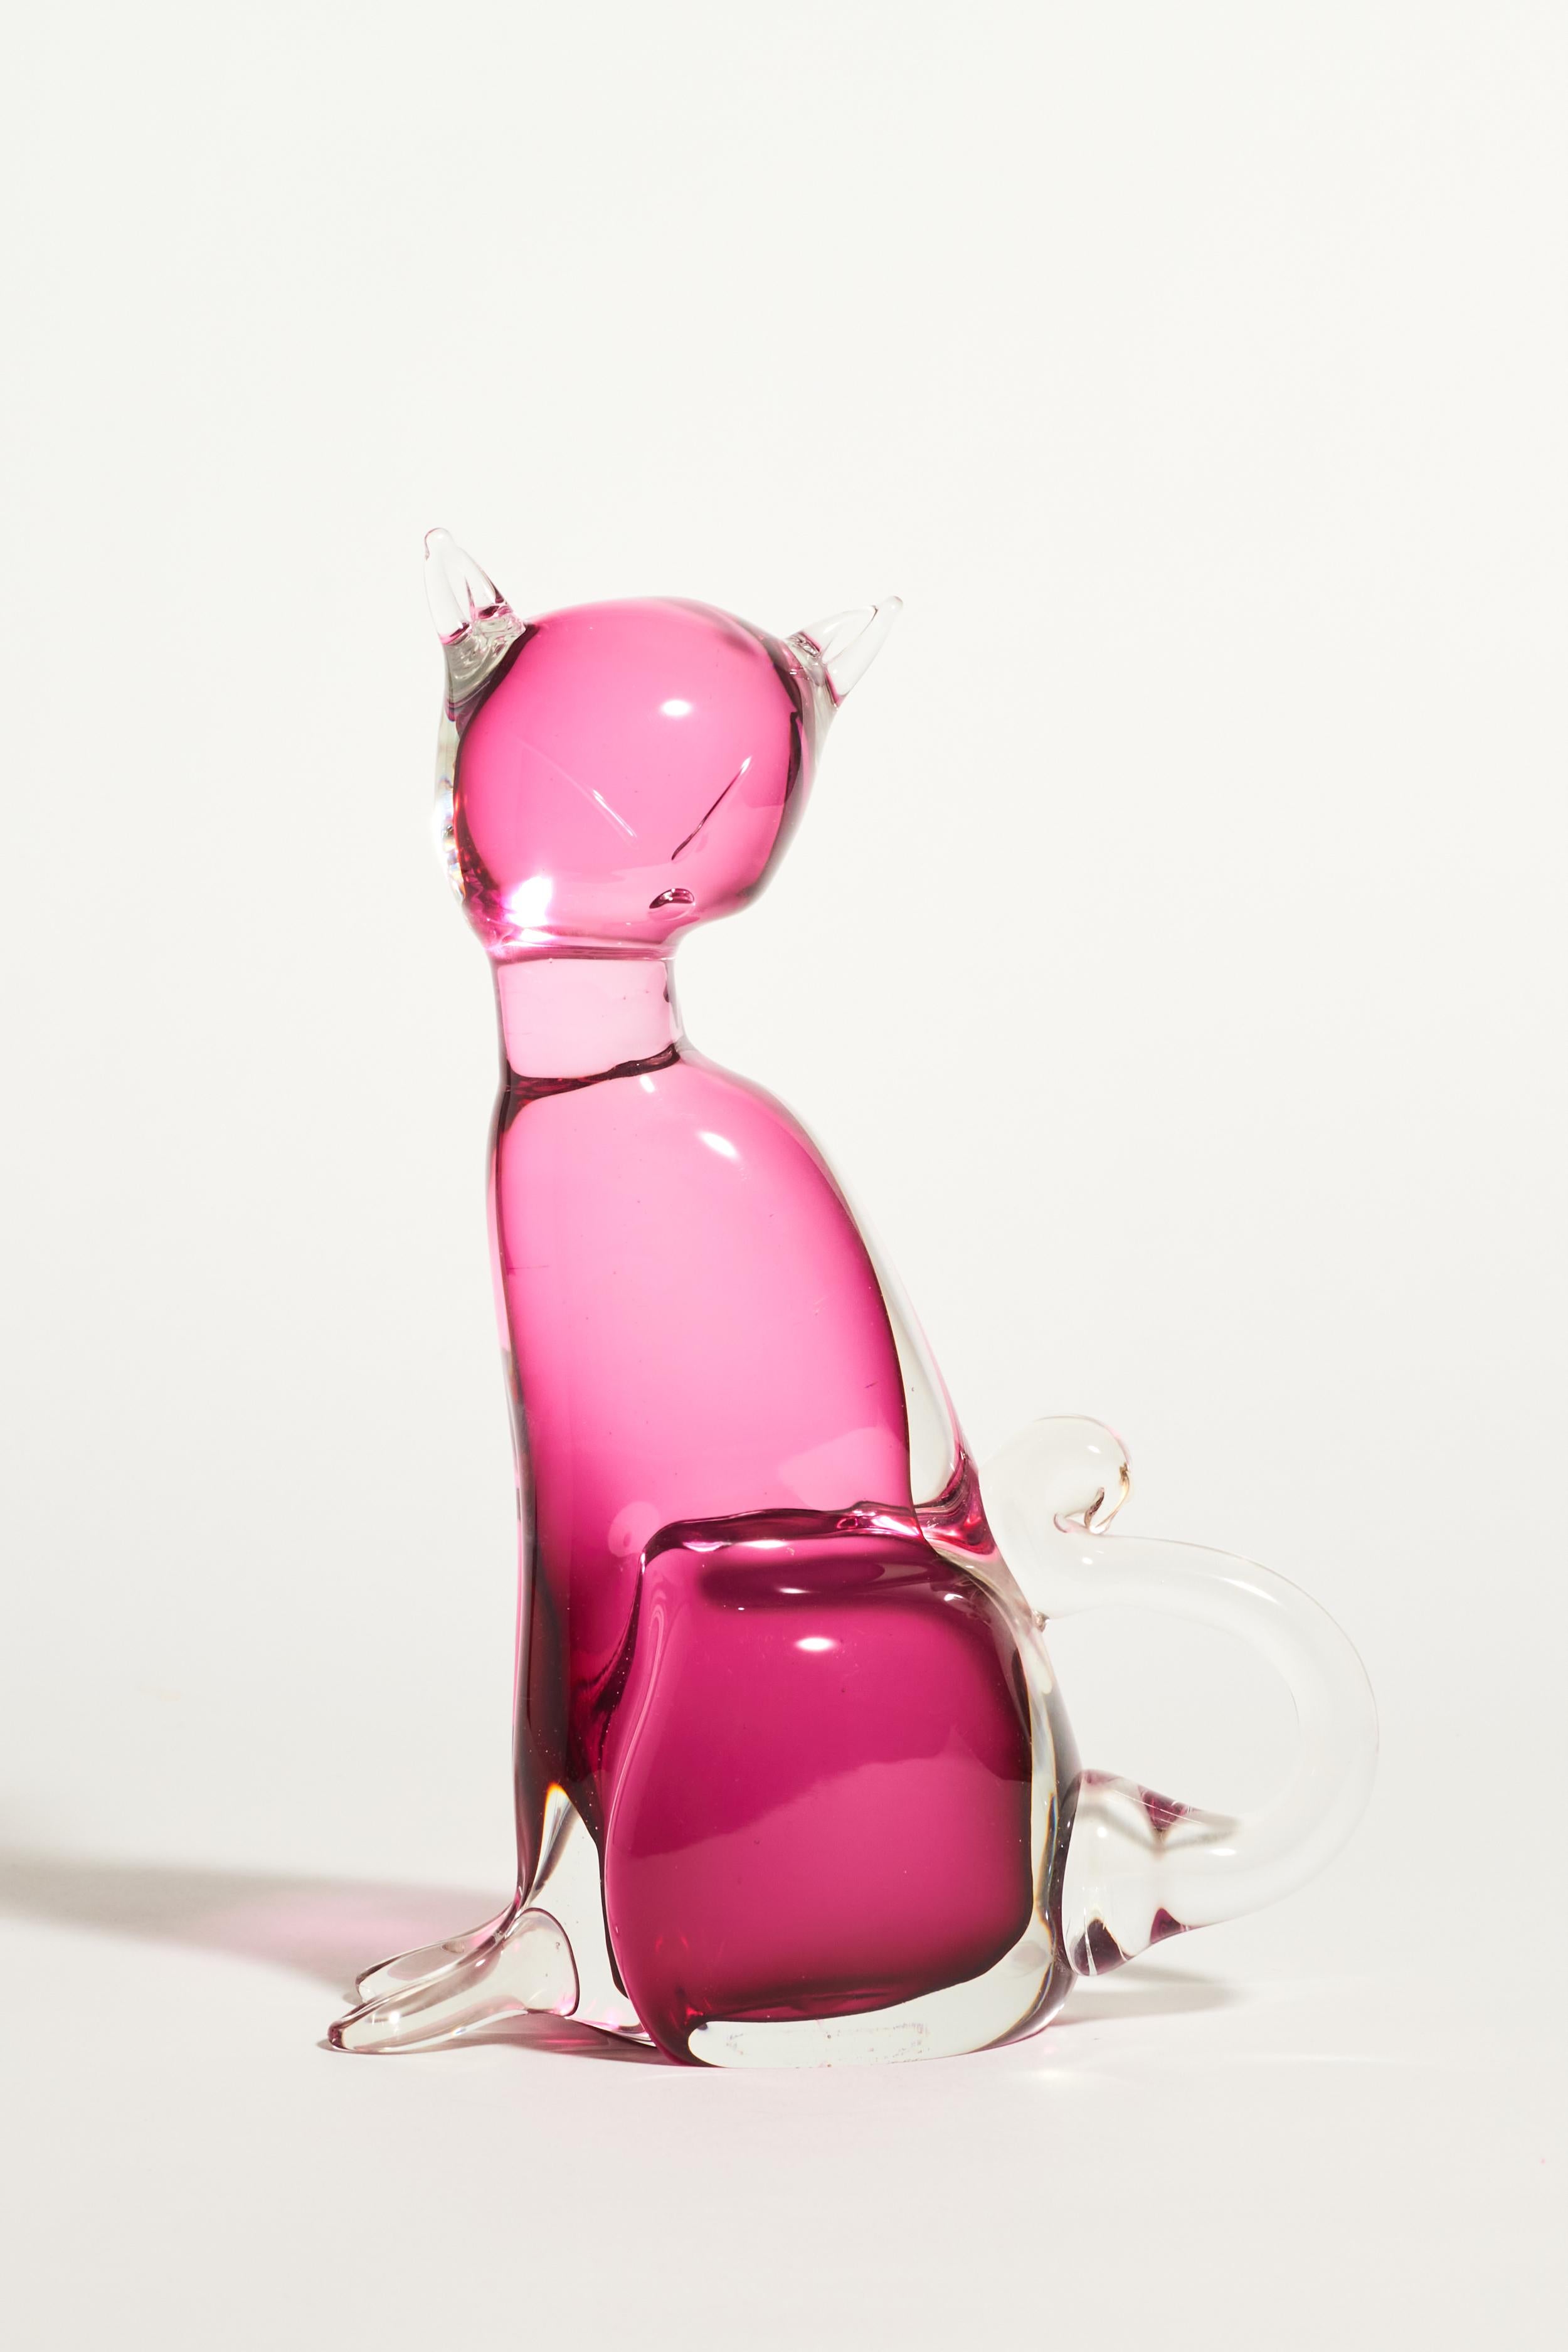 Murano layered glass cat with expressive face details and gorgeous cranberry pink inner layer.